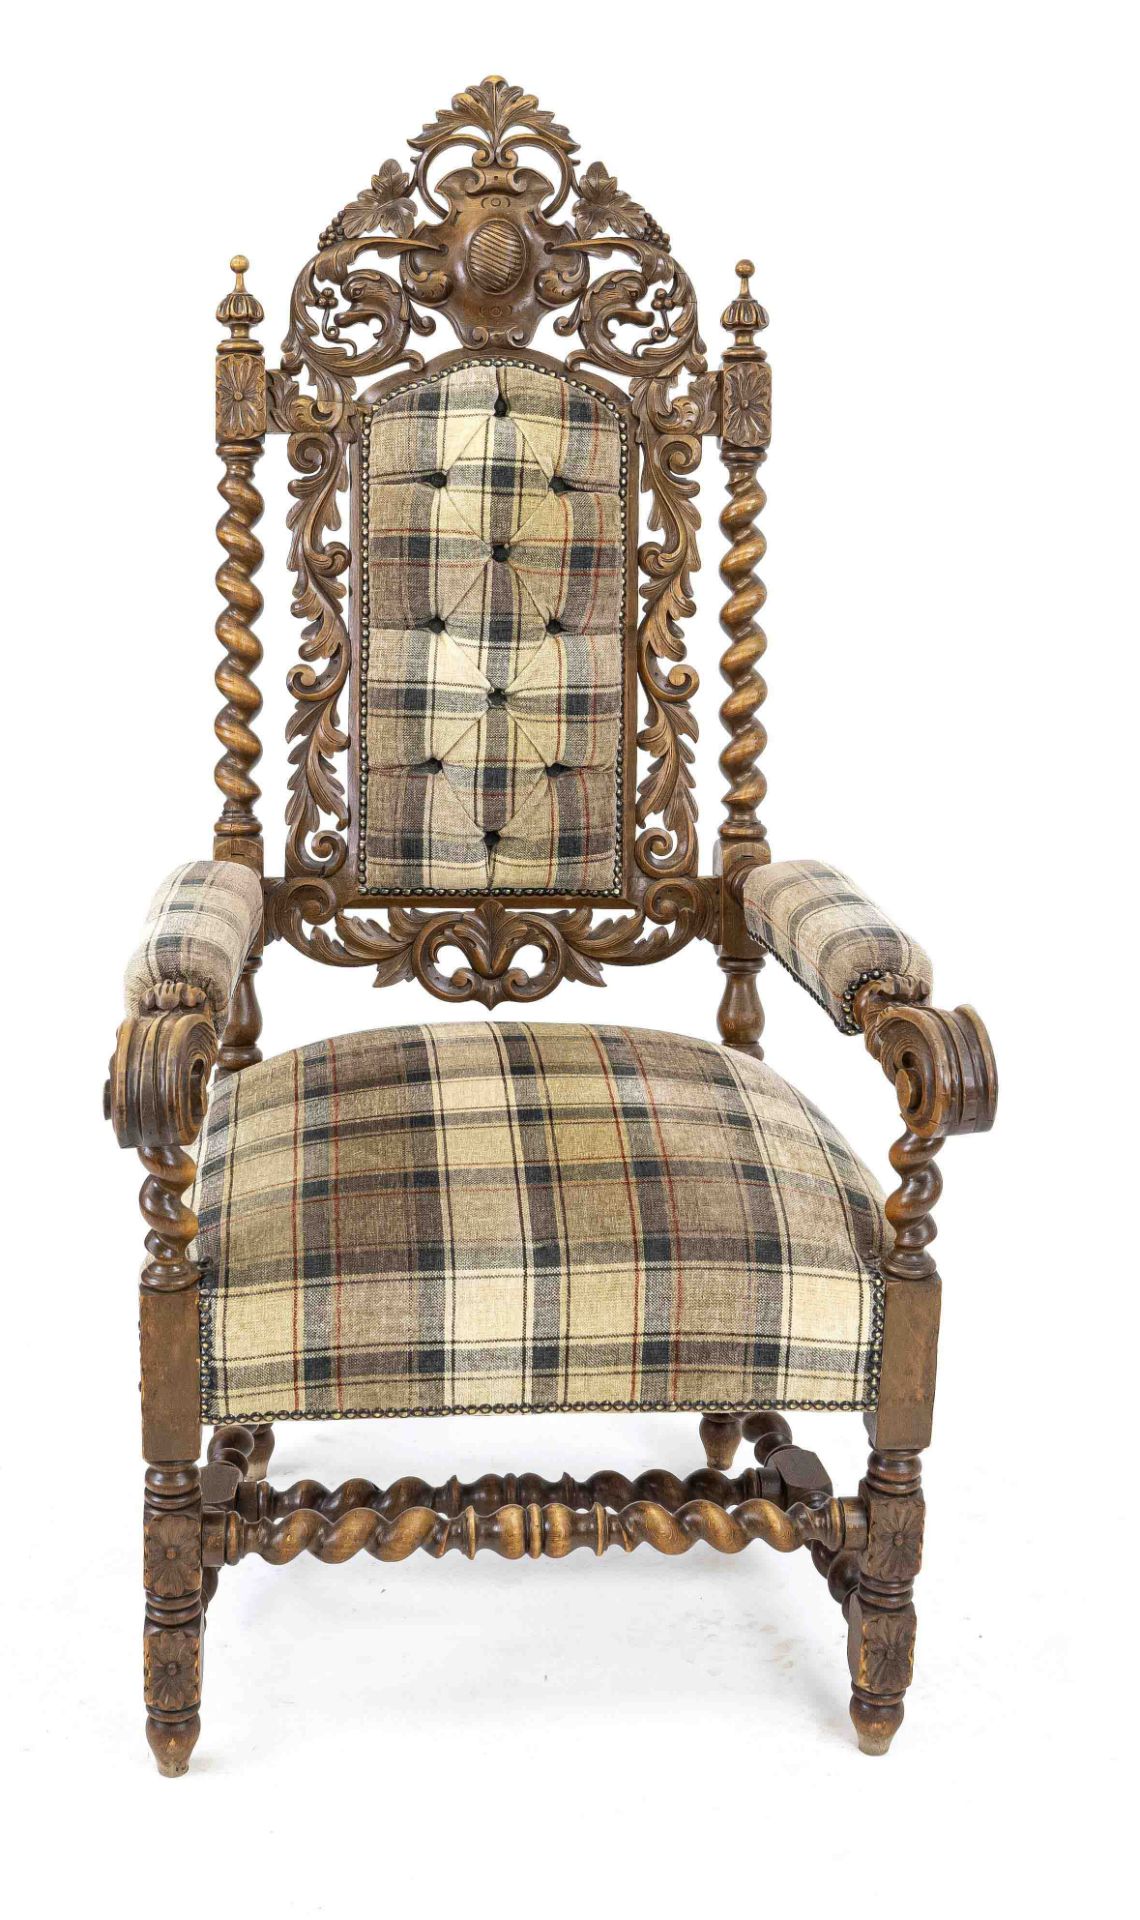 Stately armchair from around 1880, beech wood stained walnut, carvings typical of the period, 135 - Image 2 of 2